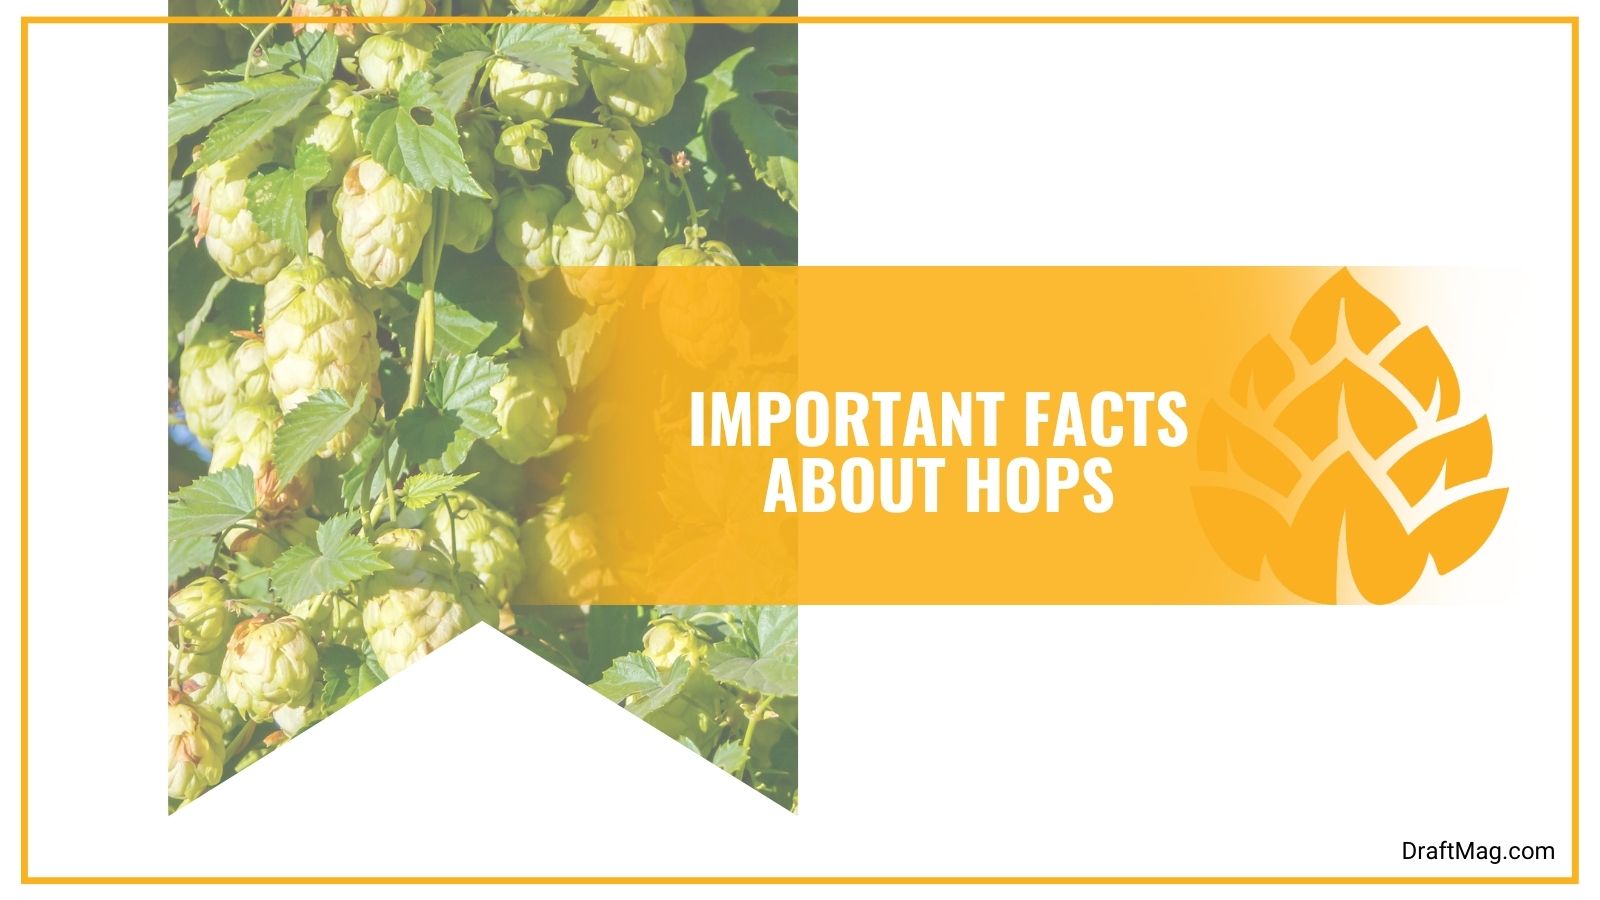 Important Facts About Hops